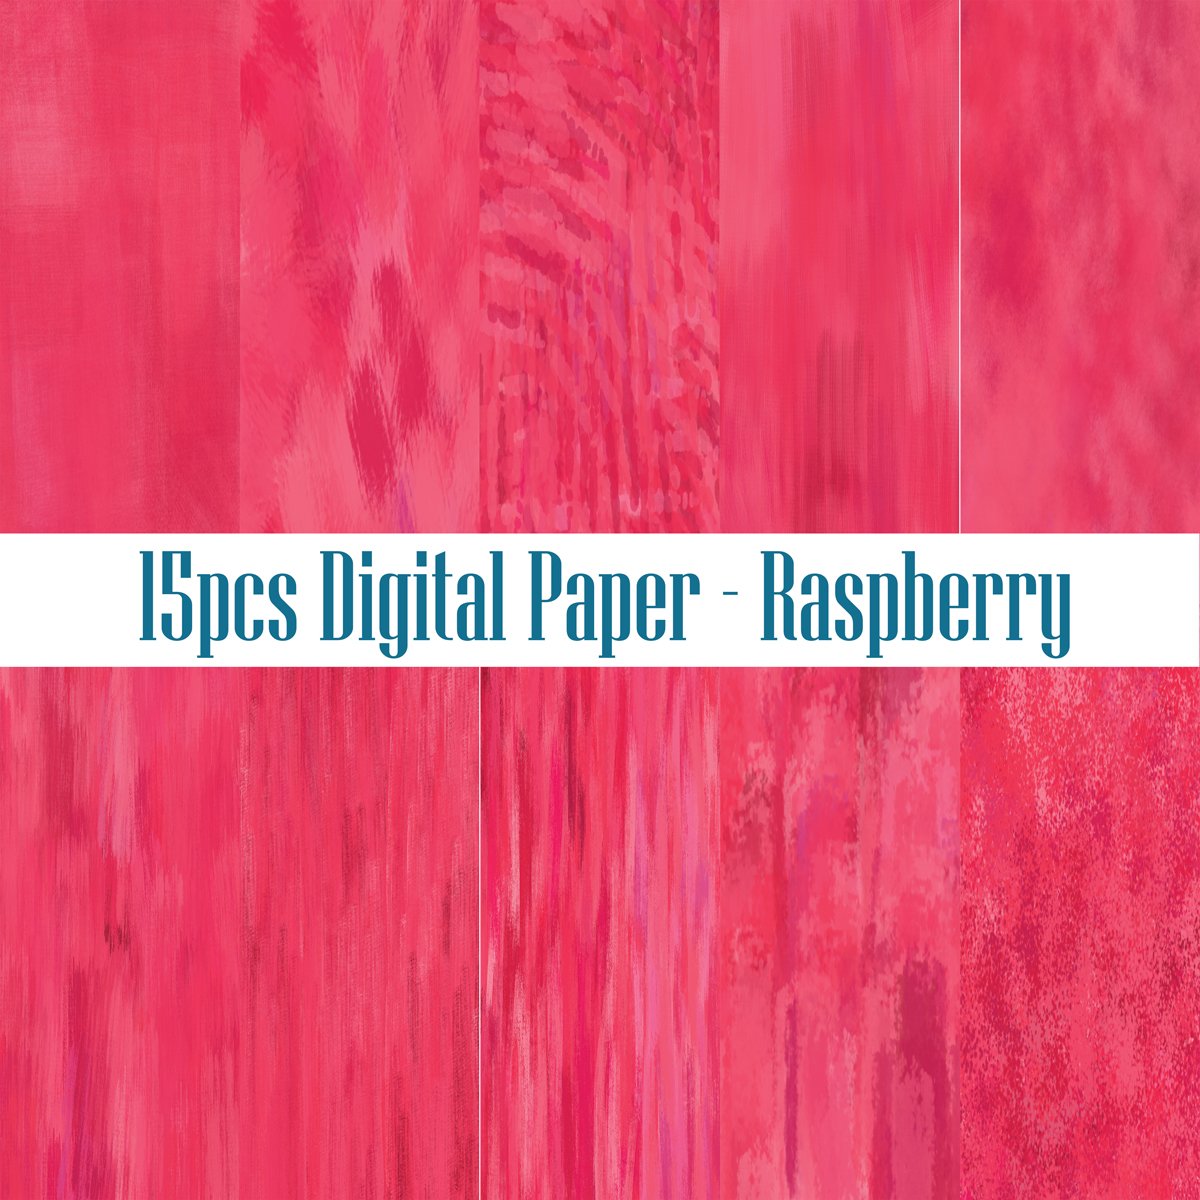 Raspberry Digital Papers cover image.